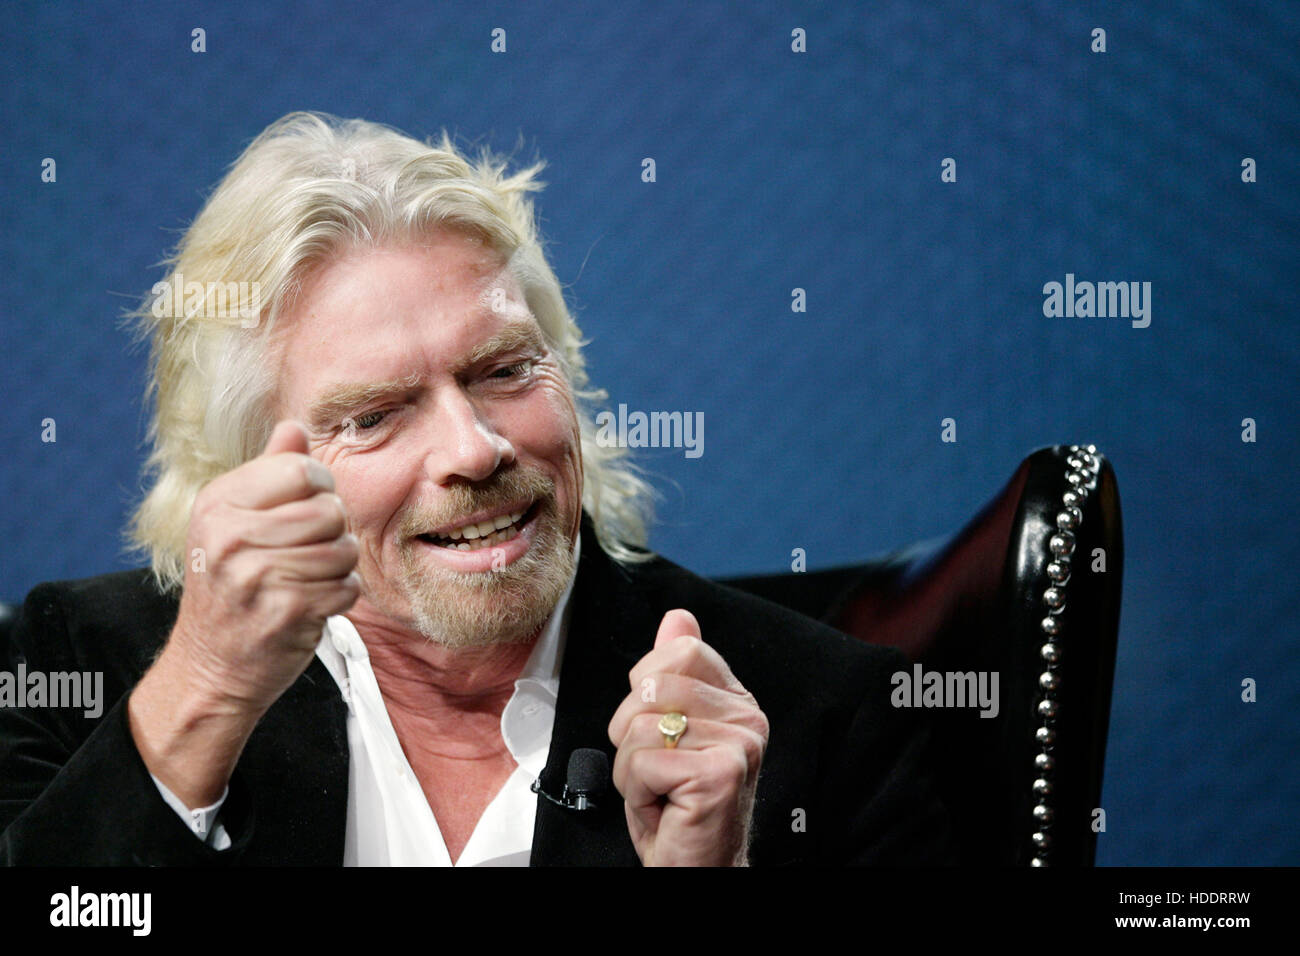 Richard Branson, founder and chairman of Virgin Group Ltd., speaks during the 2010 Ernst & Young Strategic Growth Forum in Palm Desert, California, on November 11, 2010.  Photo by Francis Specker Stock Photo